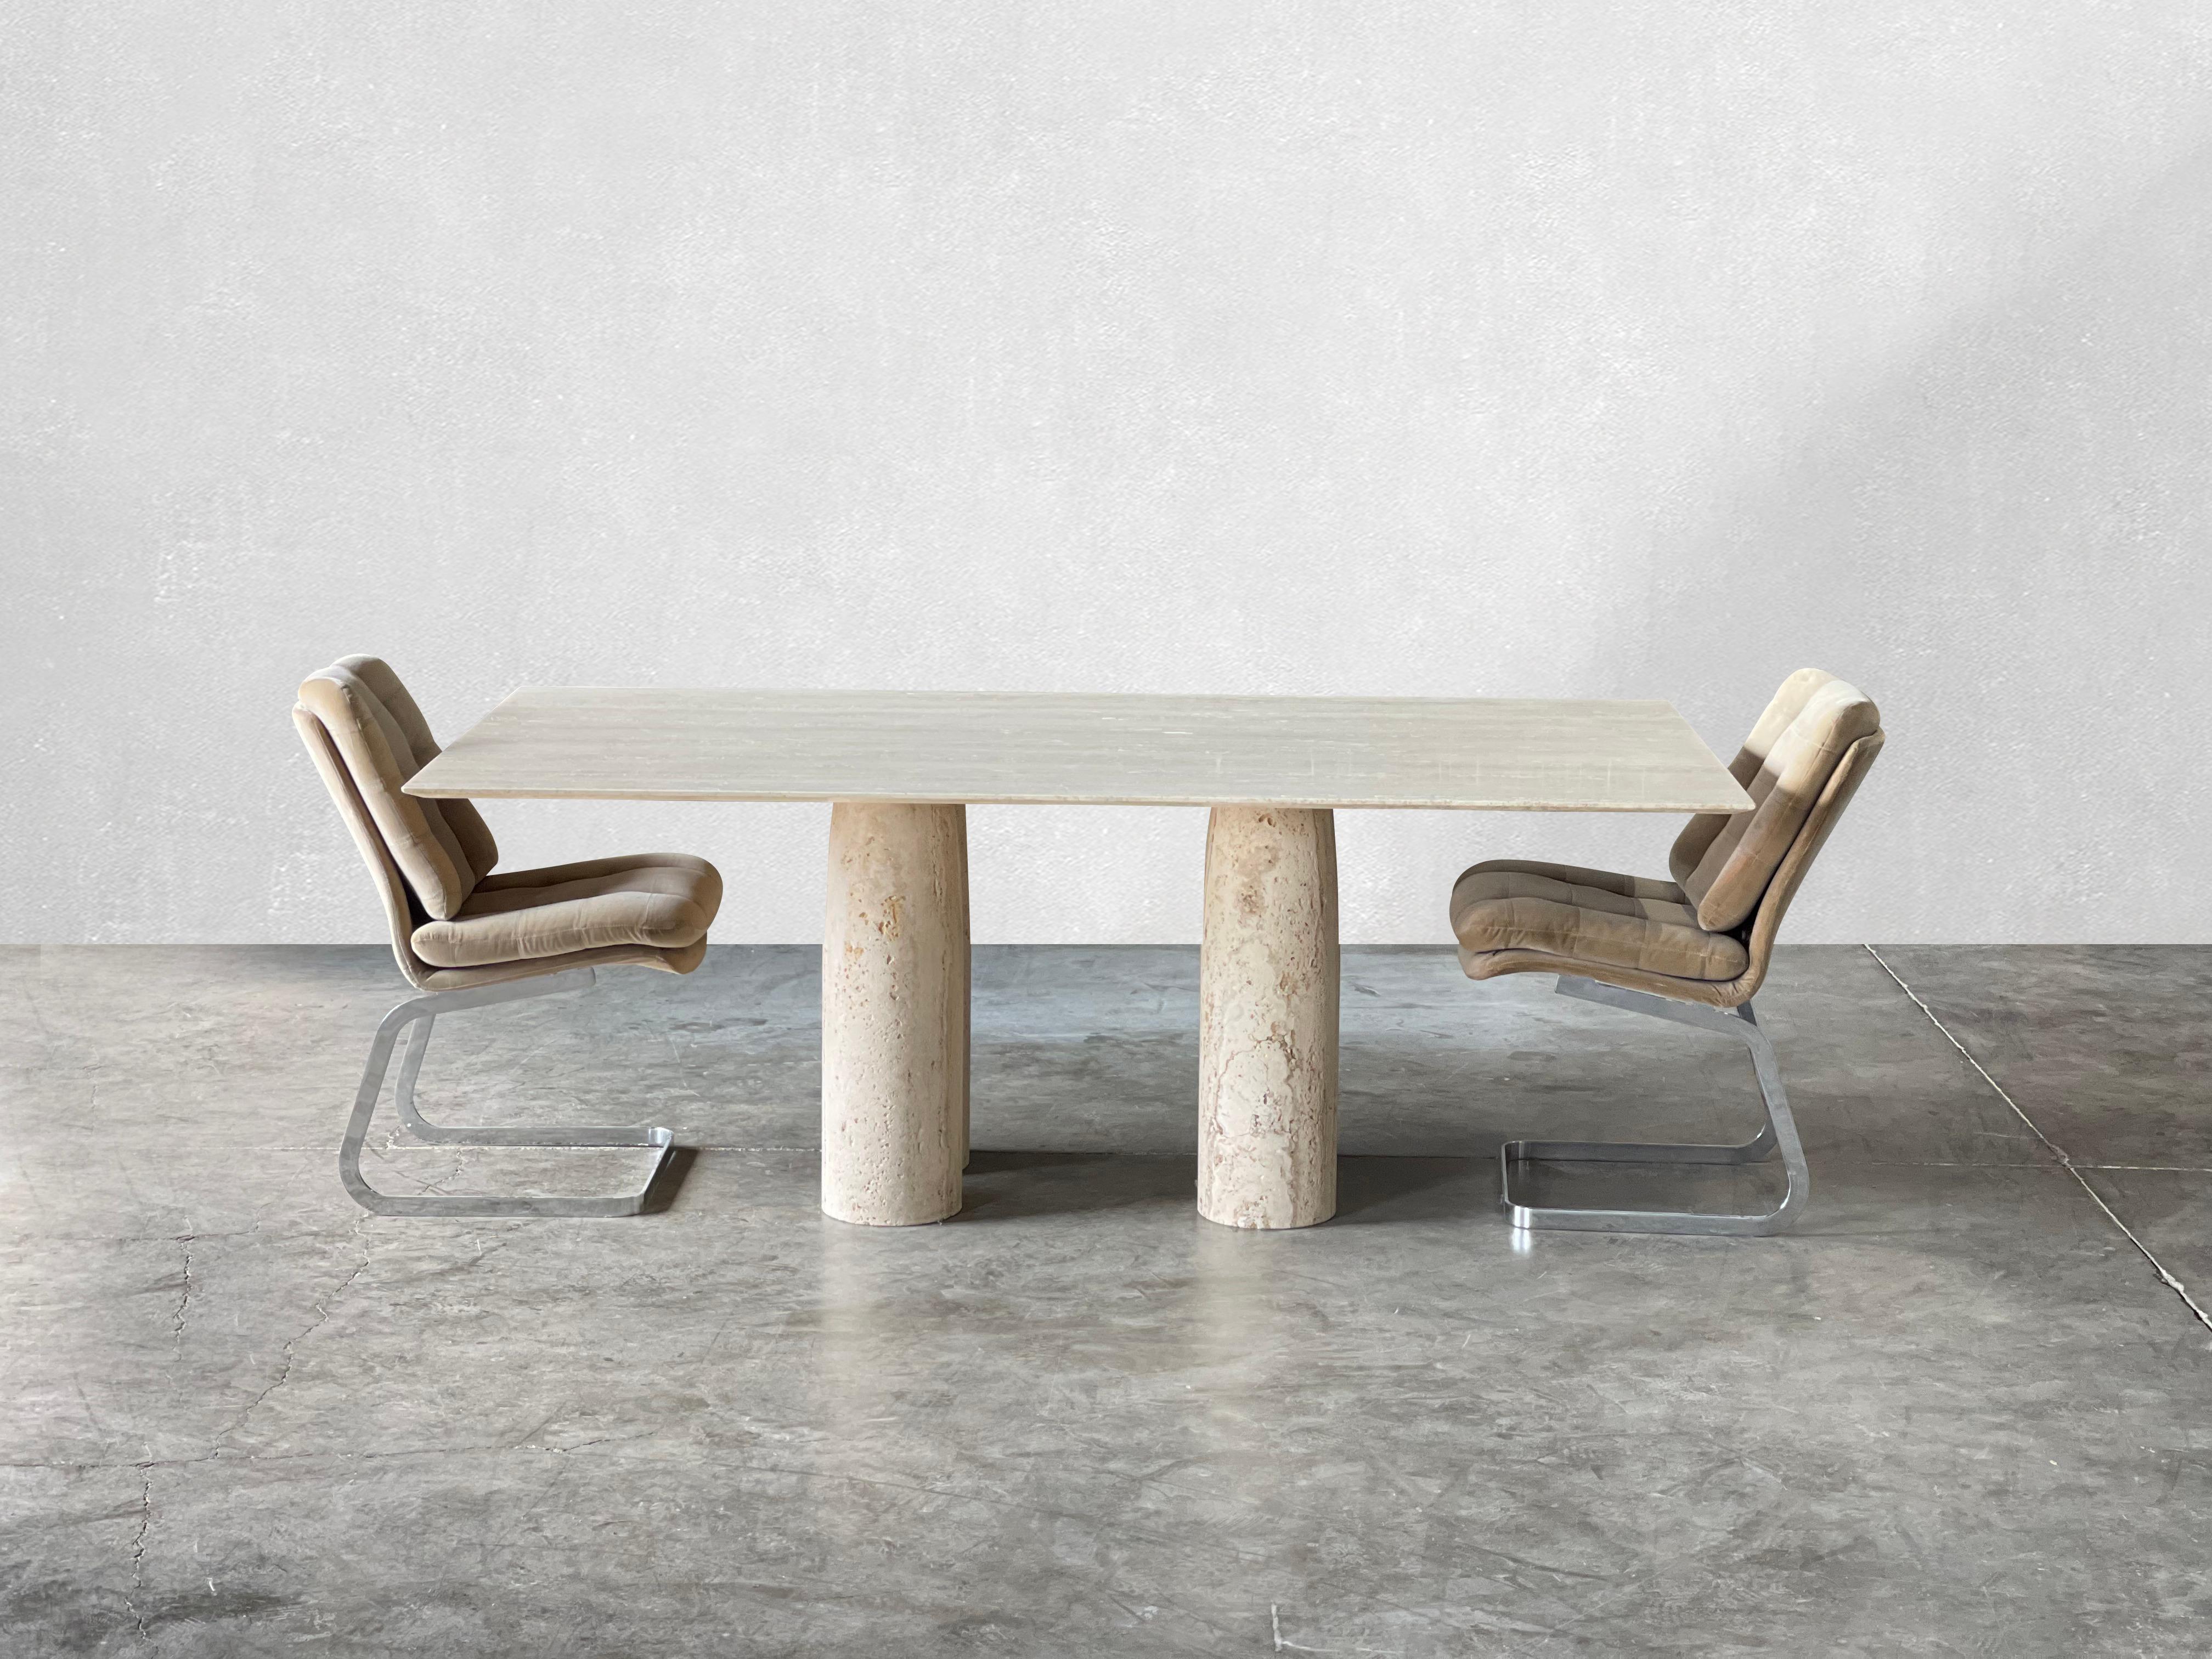 C. 1970

Monumental Italian travertine dining table by Stone International Italy, in the manner of Mario Bellini. This table is styled after Mario Bellini's Il Colonnato dining tables. There are four gorgeous matte unfilled  travertine columns. The